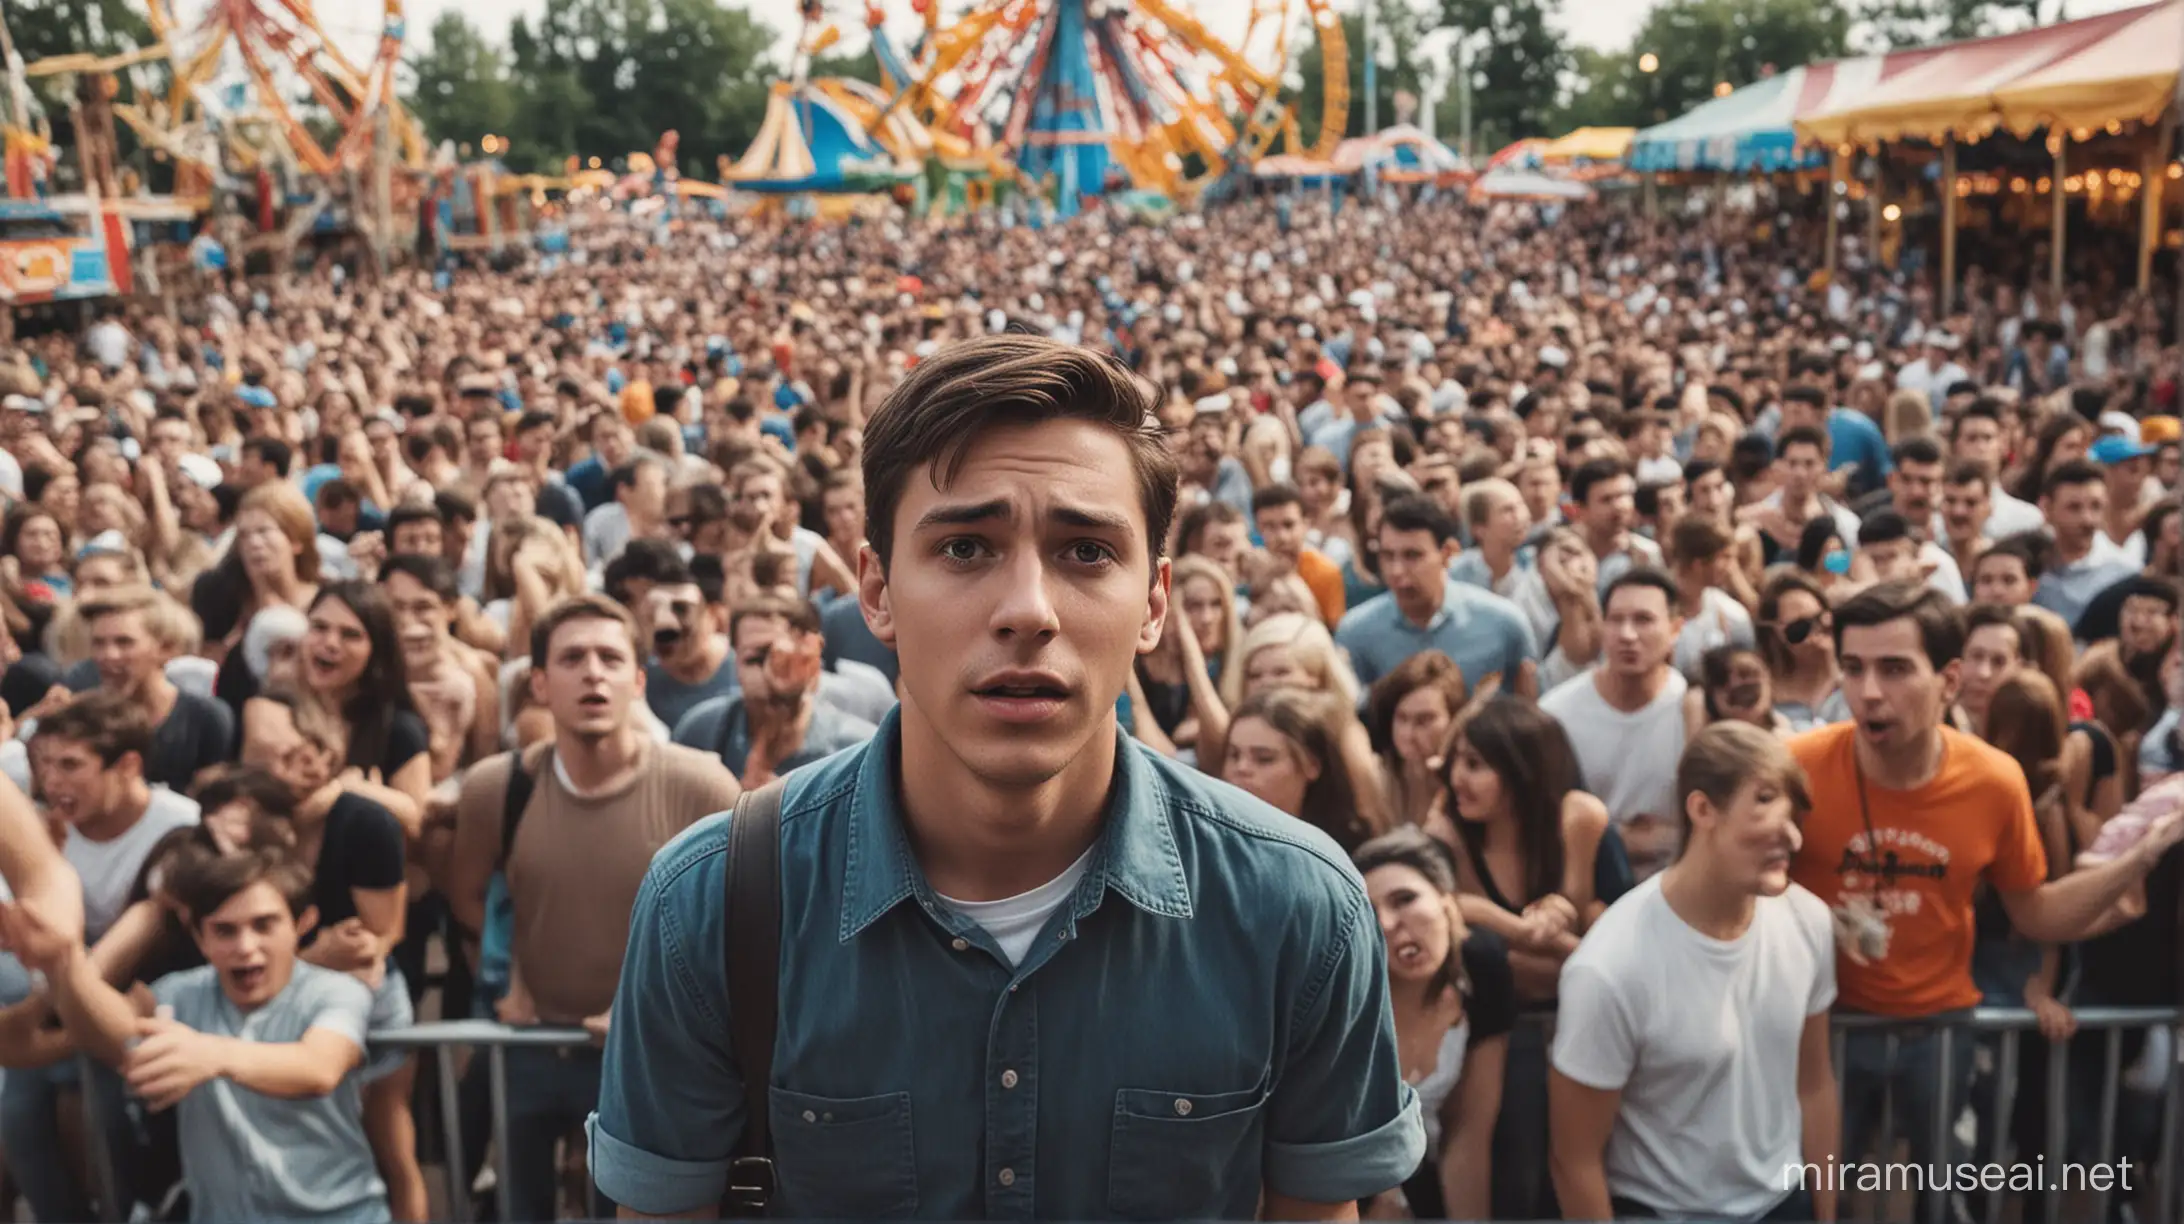 Amusement Park Crowd Tired and Confused Individual